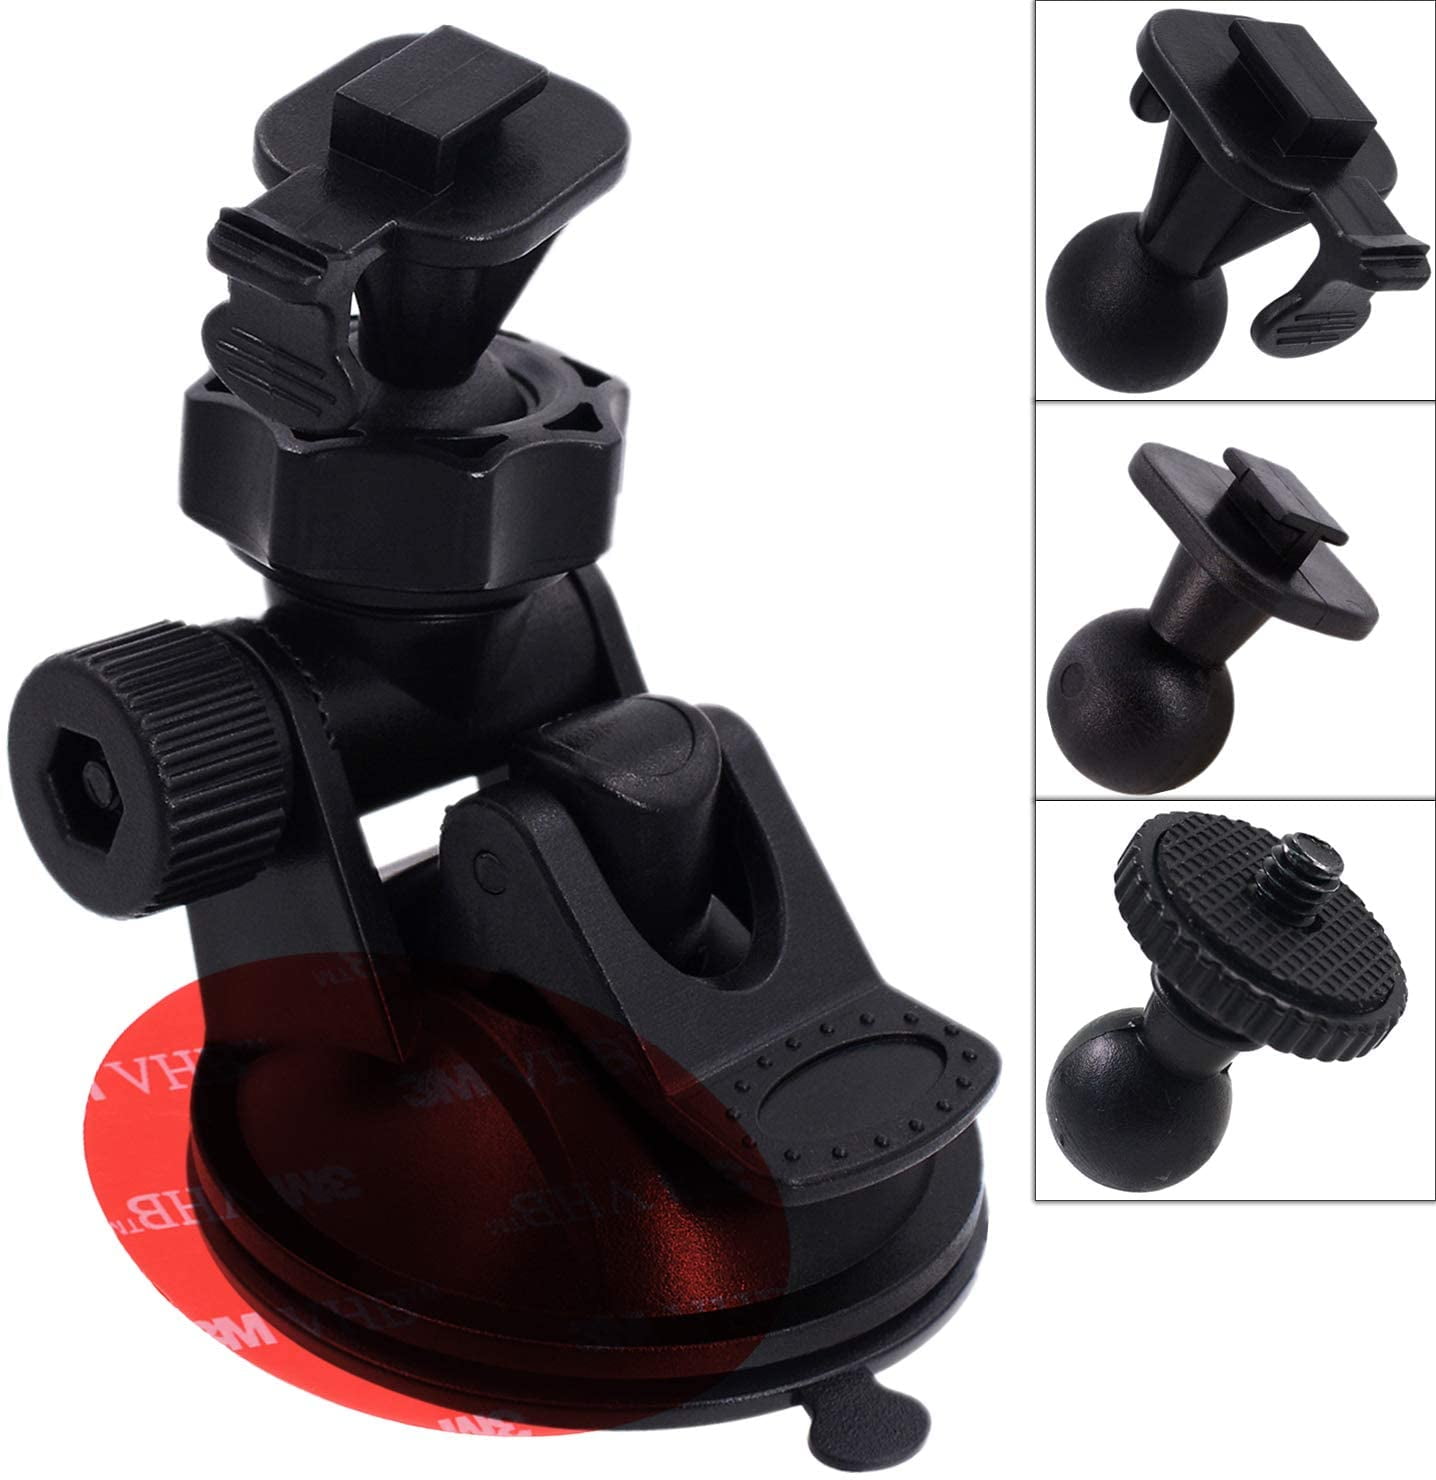  ROVE Suction Cup Mount for R2-4K and R2-4K PRO Dash Cam Model :  Electronics